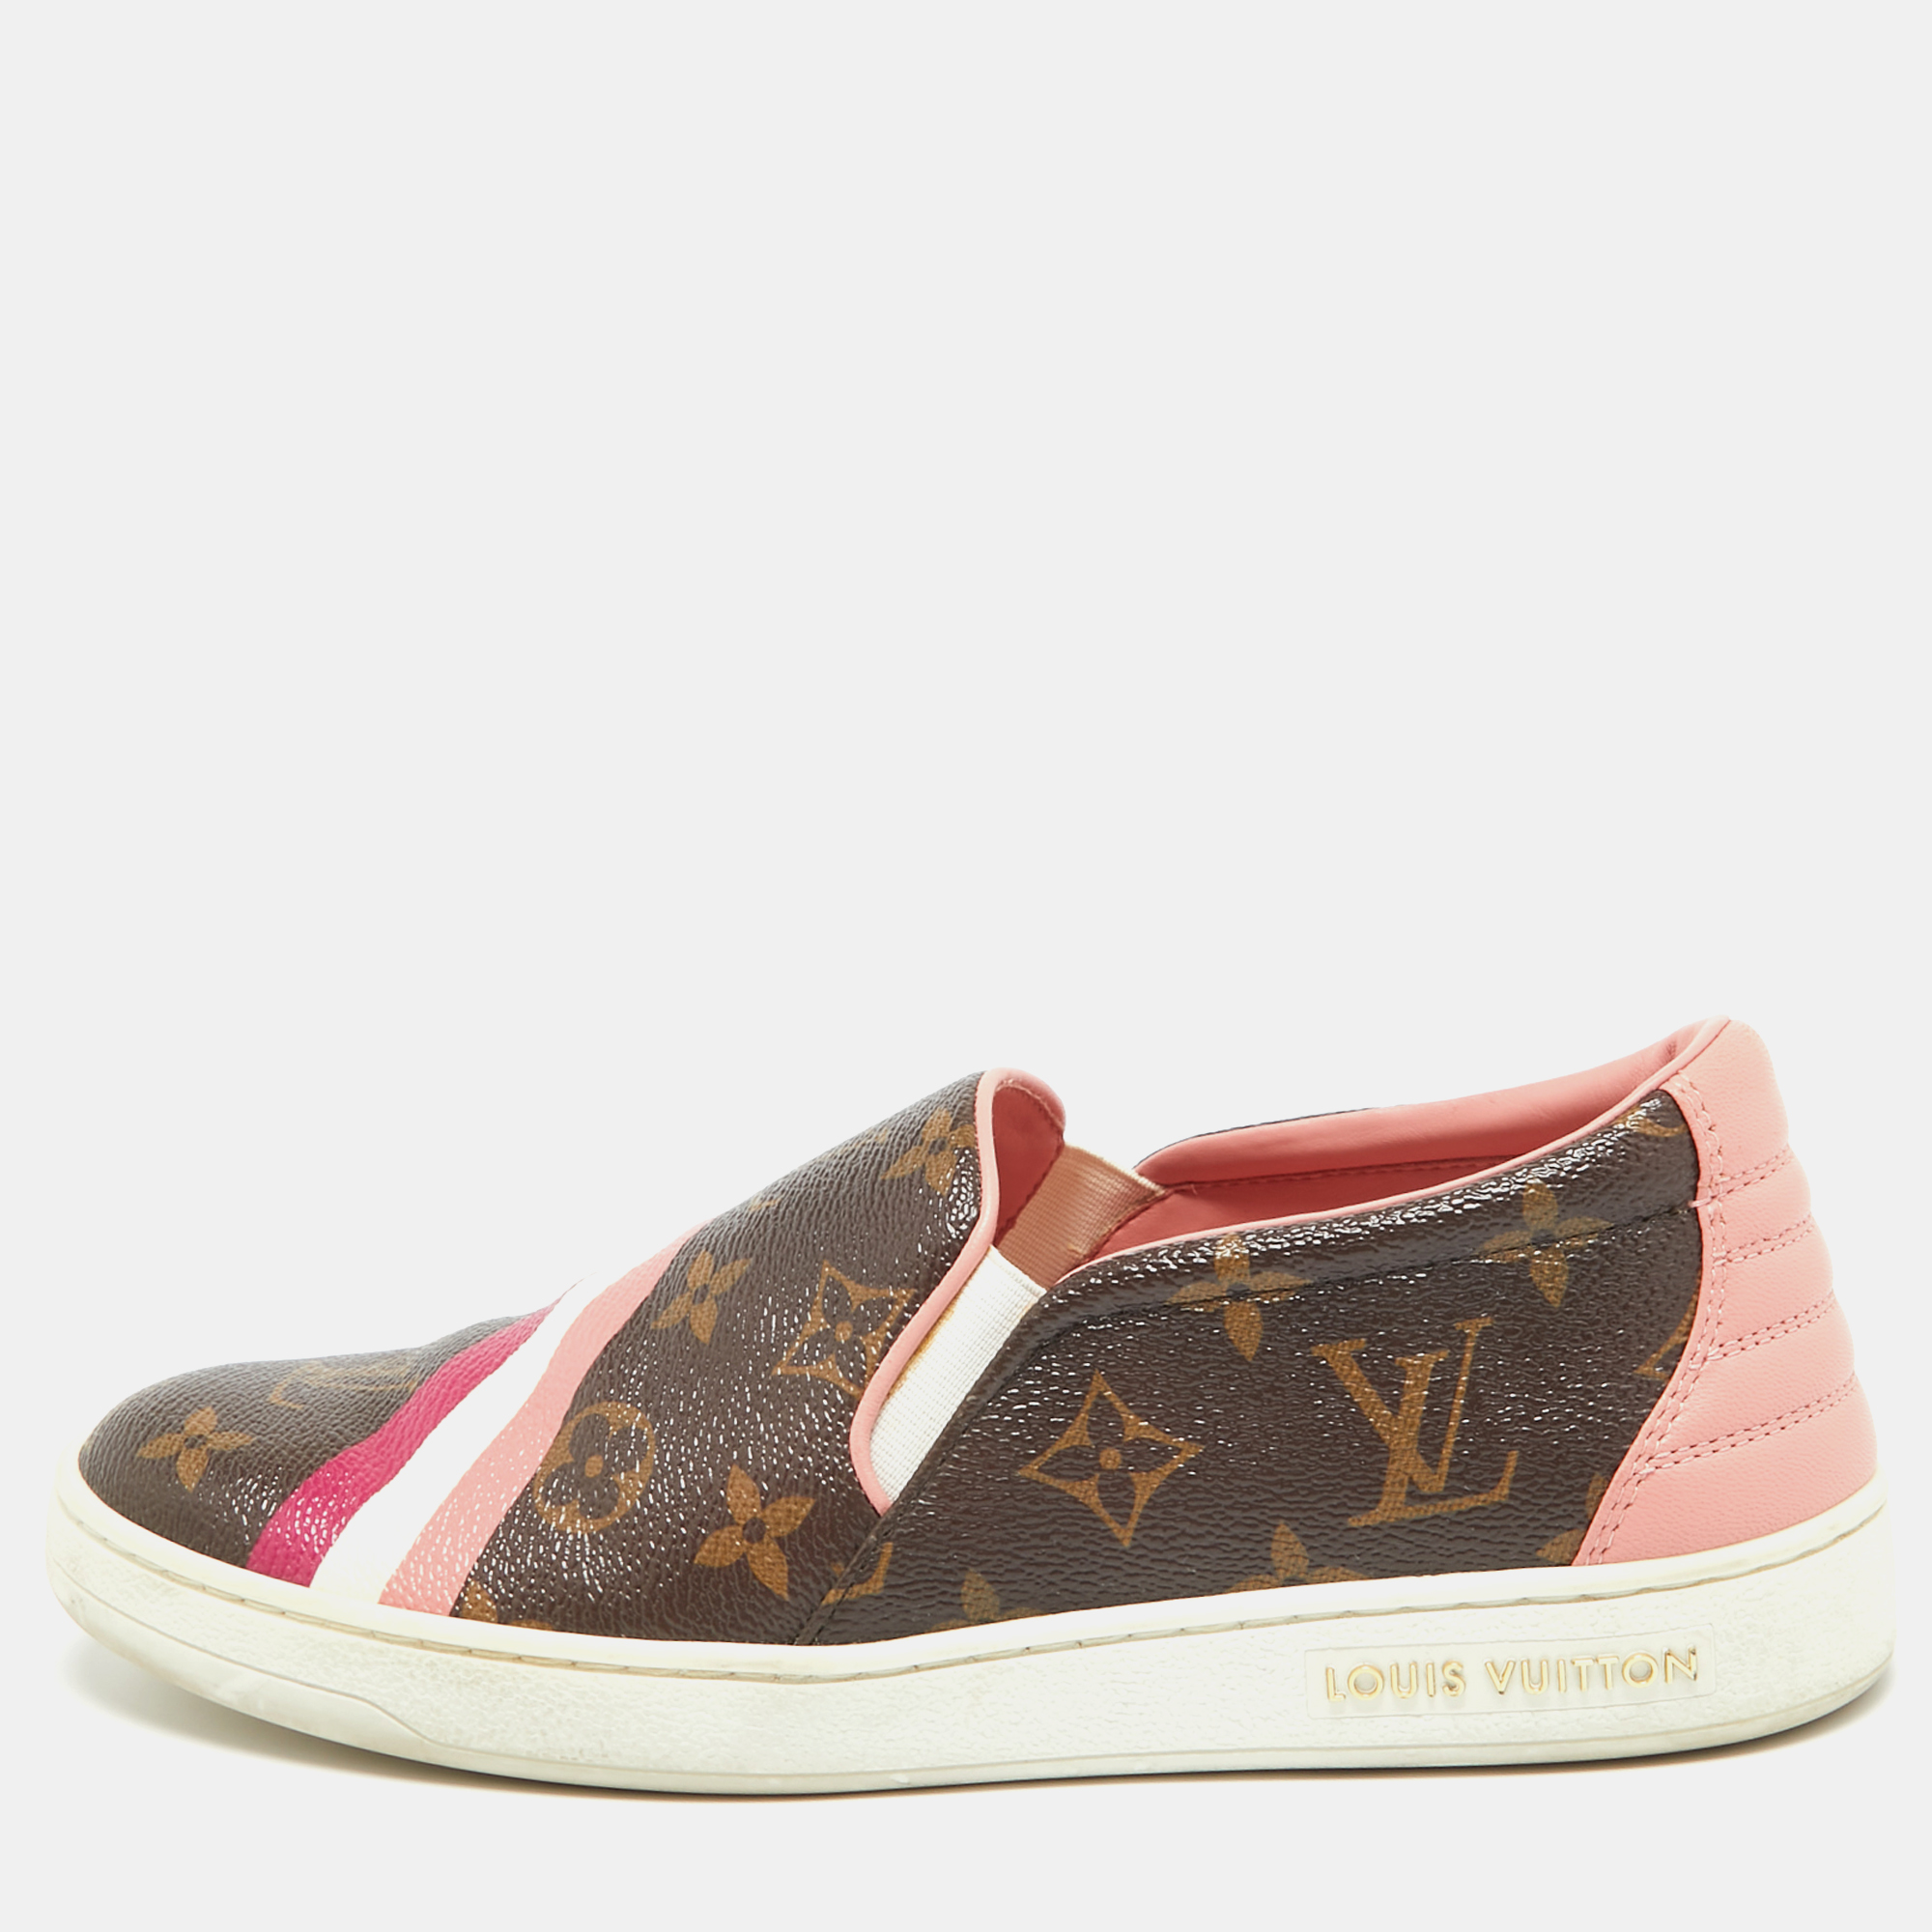 Louis vuitton brown/pink leather and canvas frontrow sneakers size 36.5